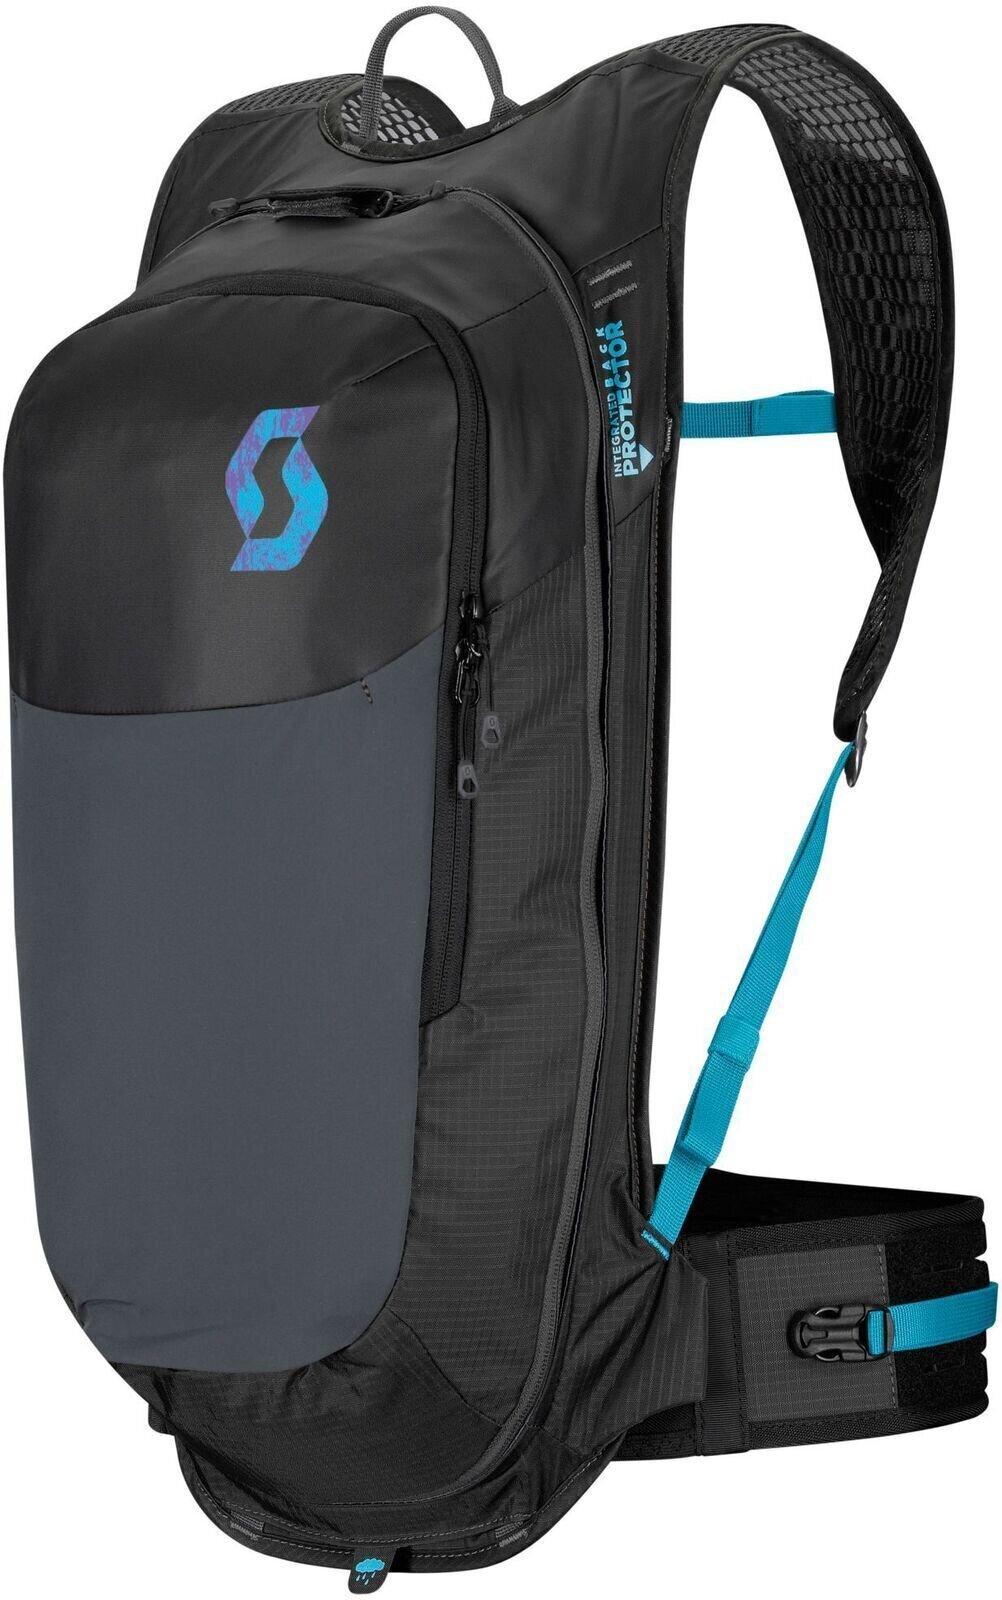 Cycling backpack and accessories Scott Trail Protect FR' 20 Black